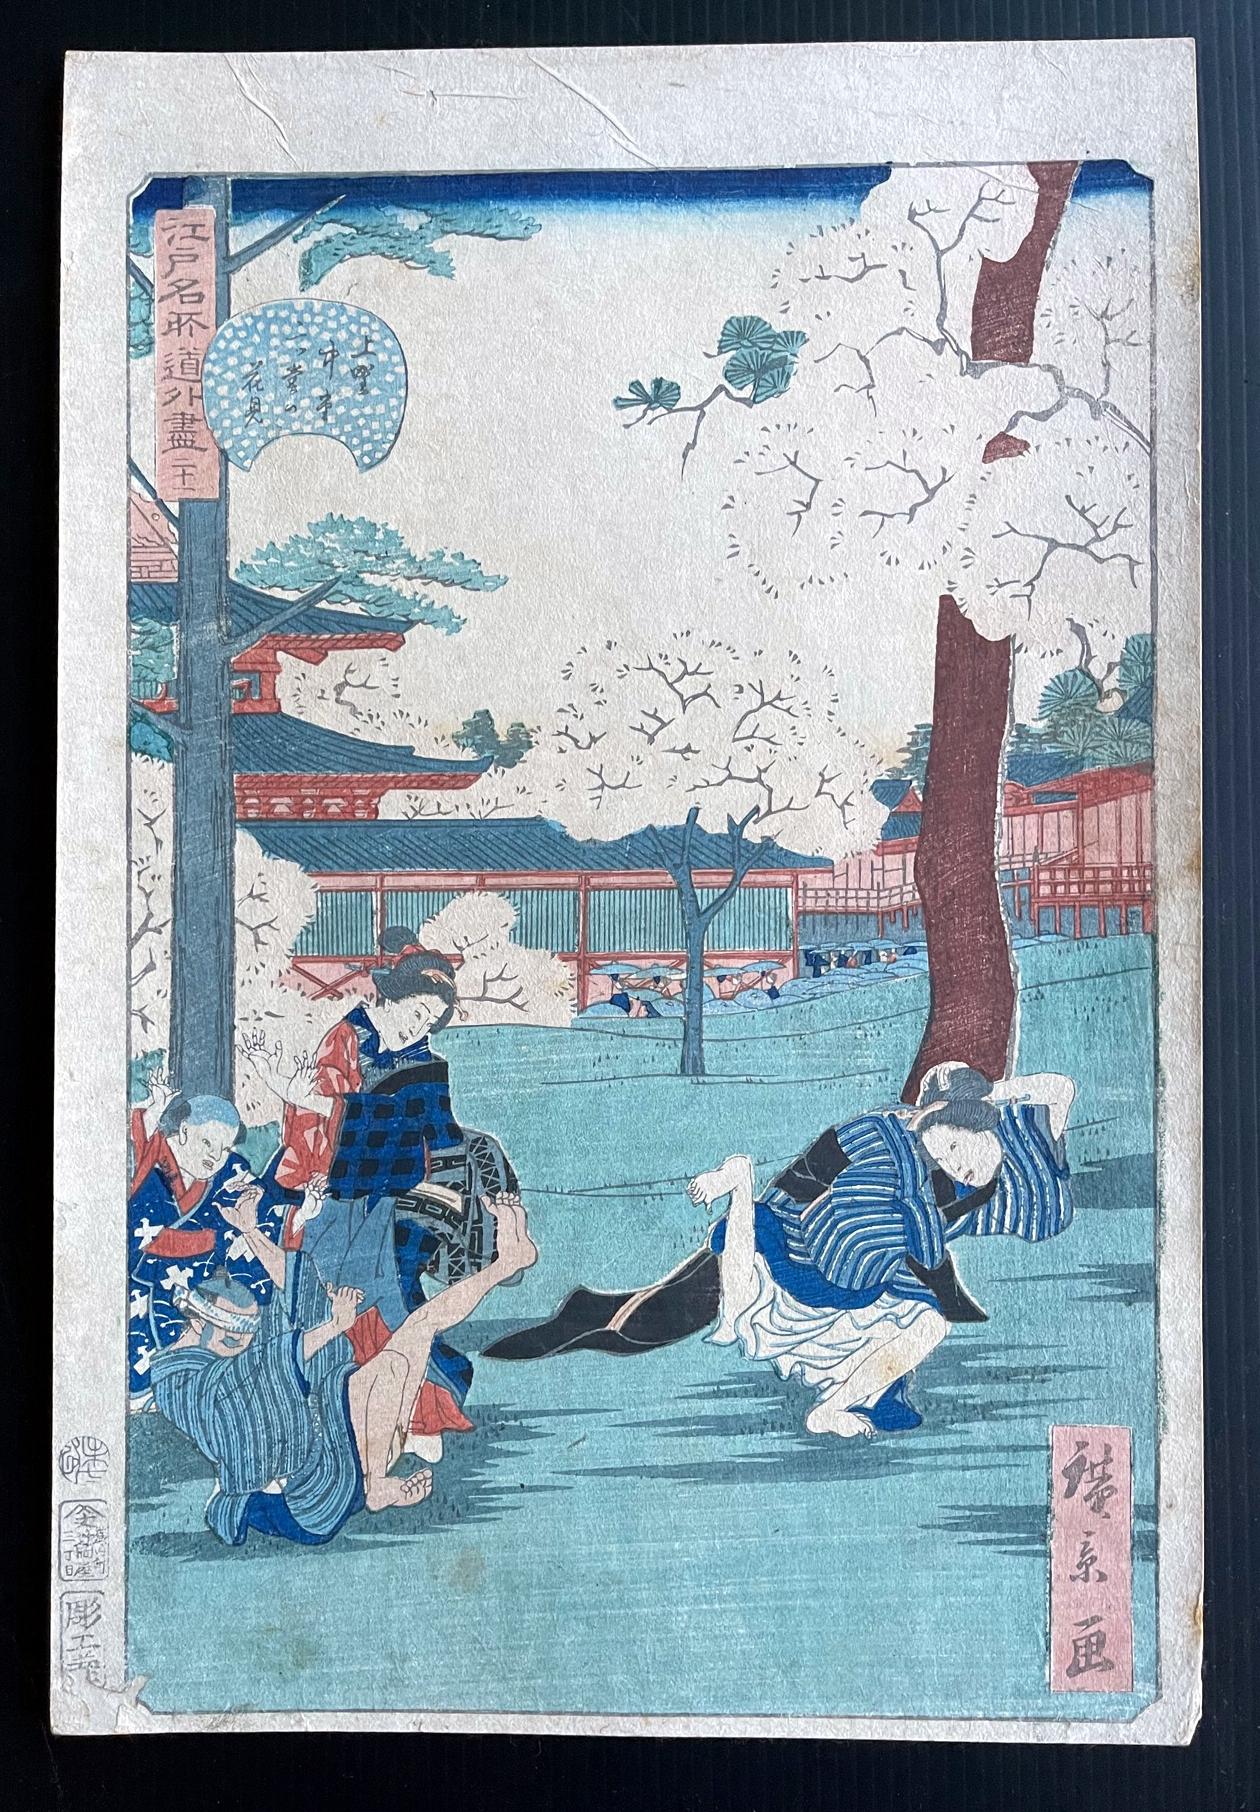 Artist: Utagawa Hirokage (active 1855-1865)
Series: Comical Views of Famous Places in Edo
Number: 21 